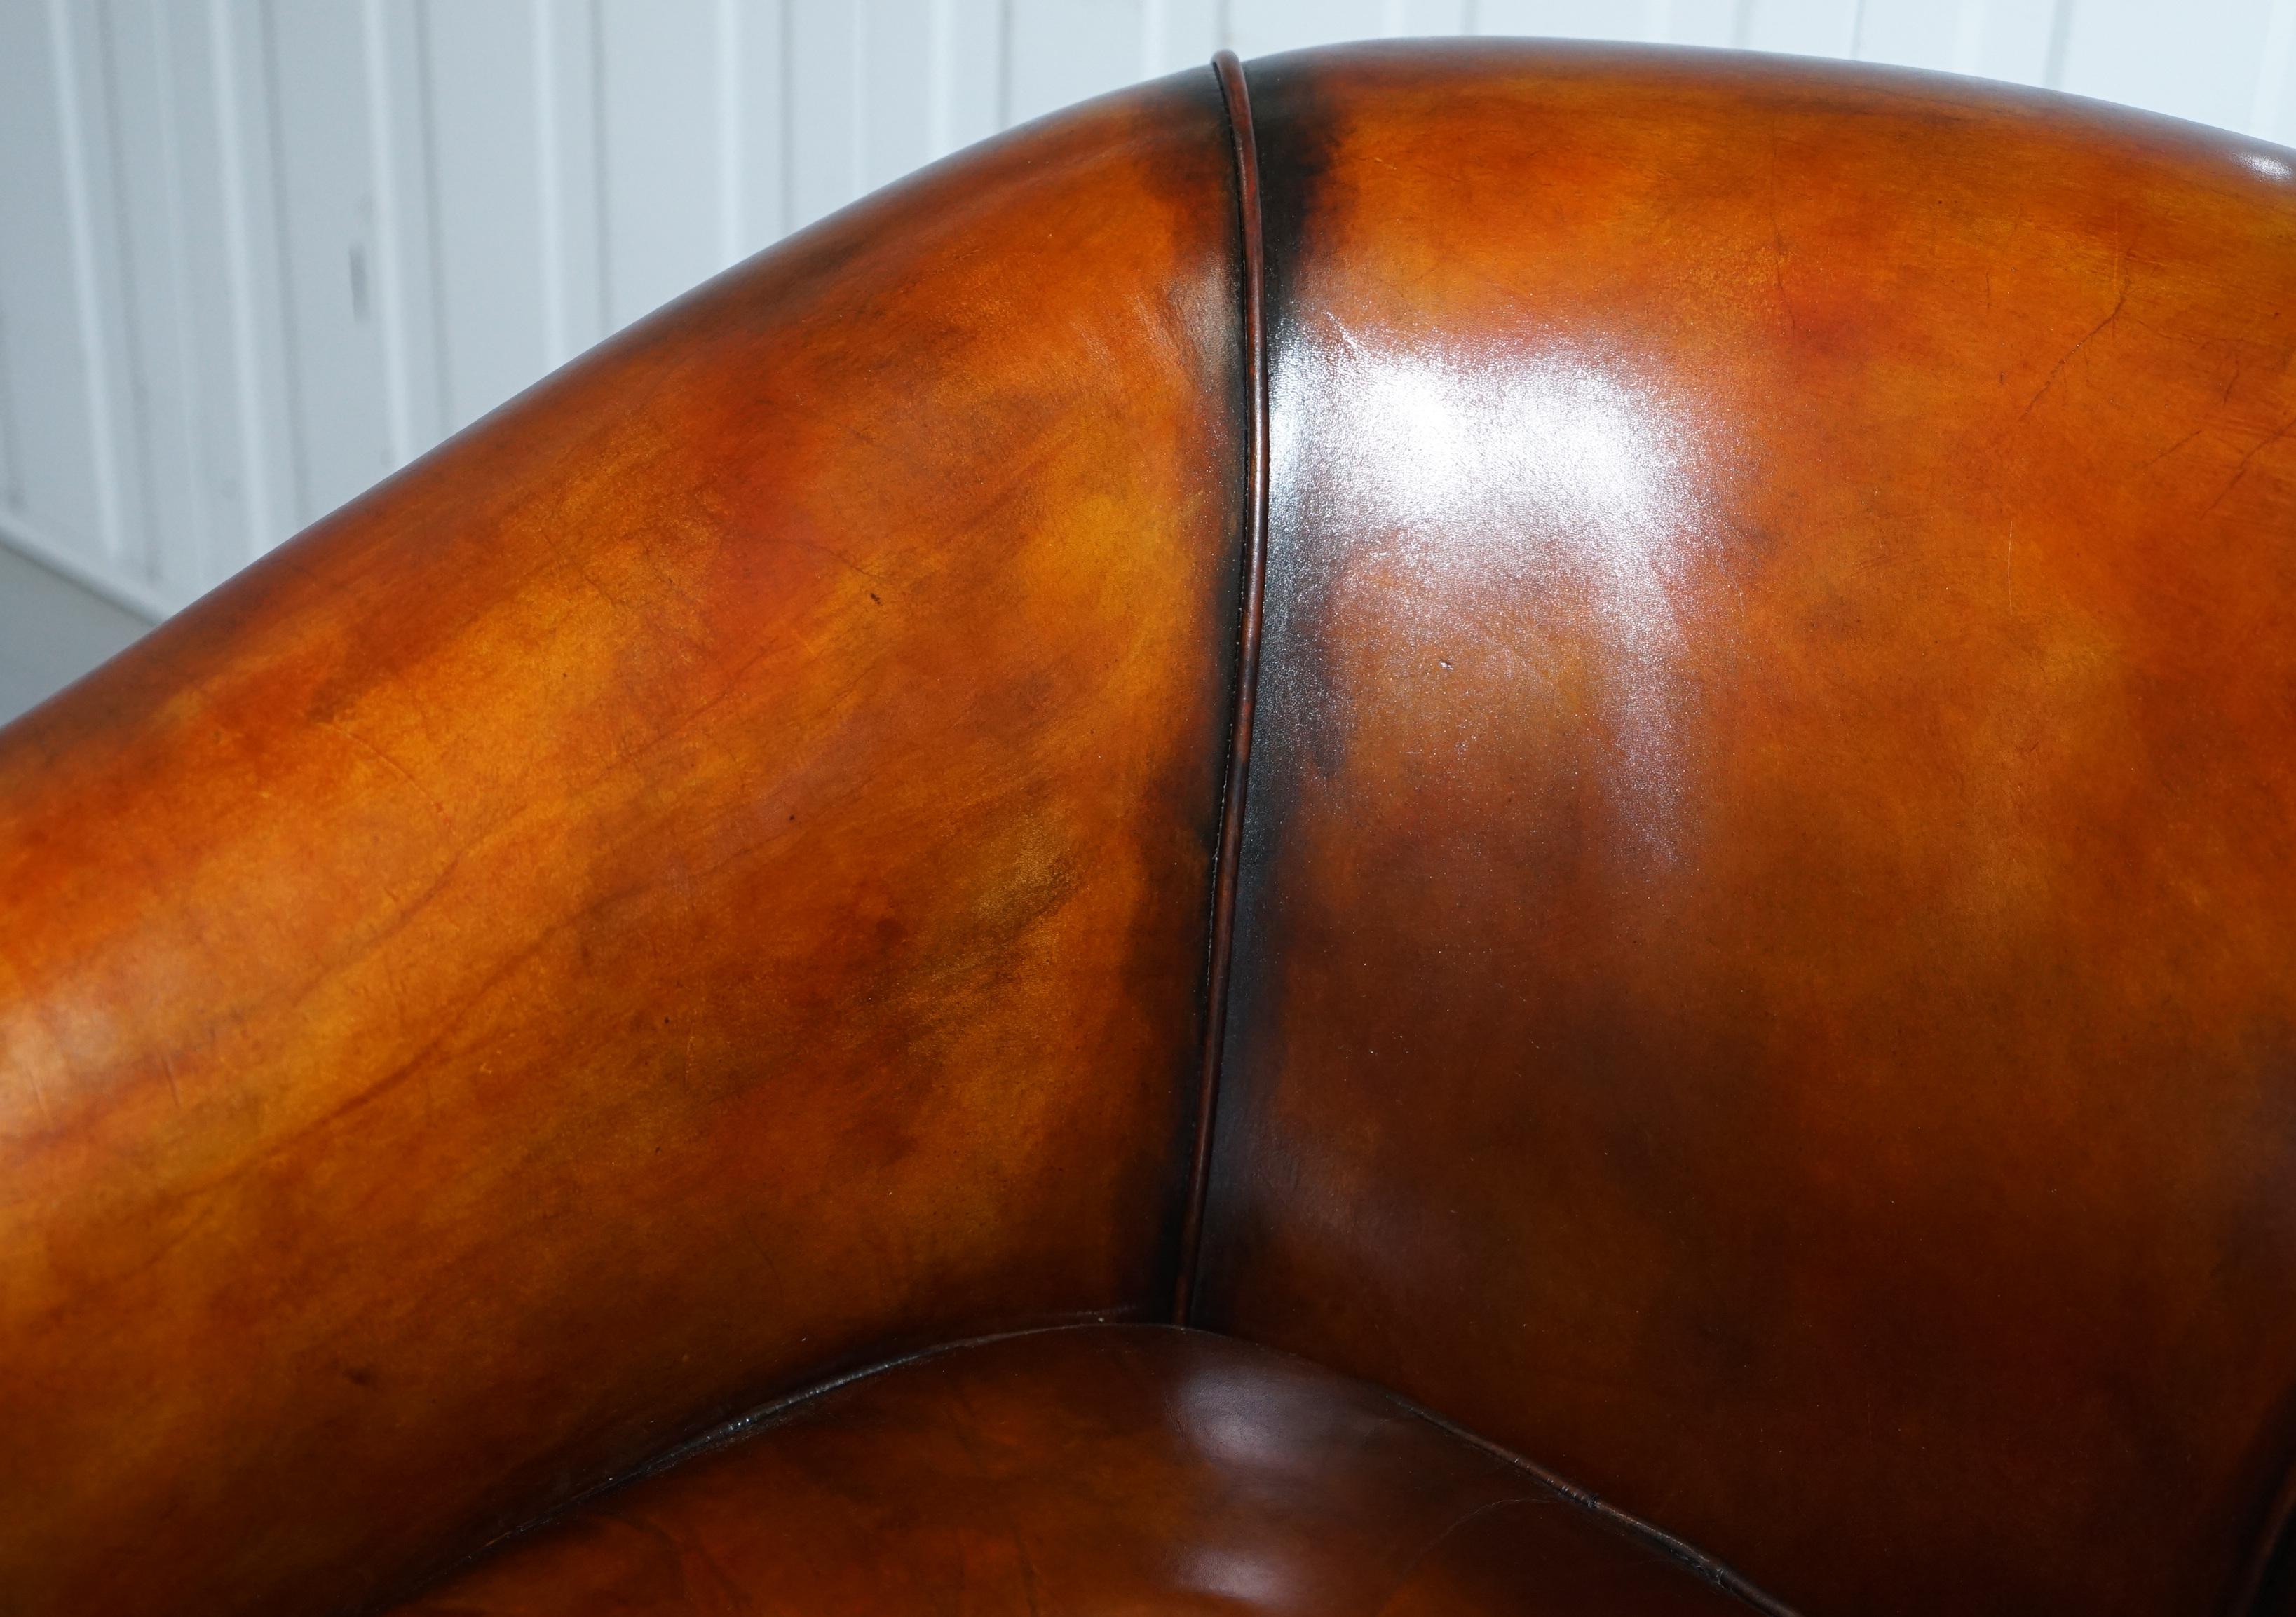 James Bond 007 Armchair from Spectre Leather Chairs of Bath Fully Restored 1